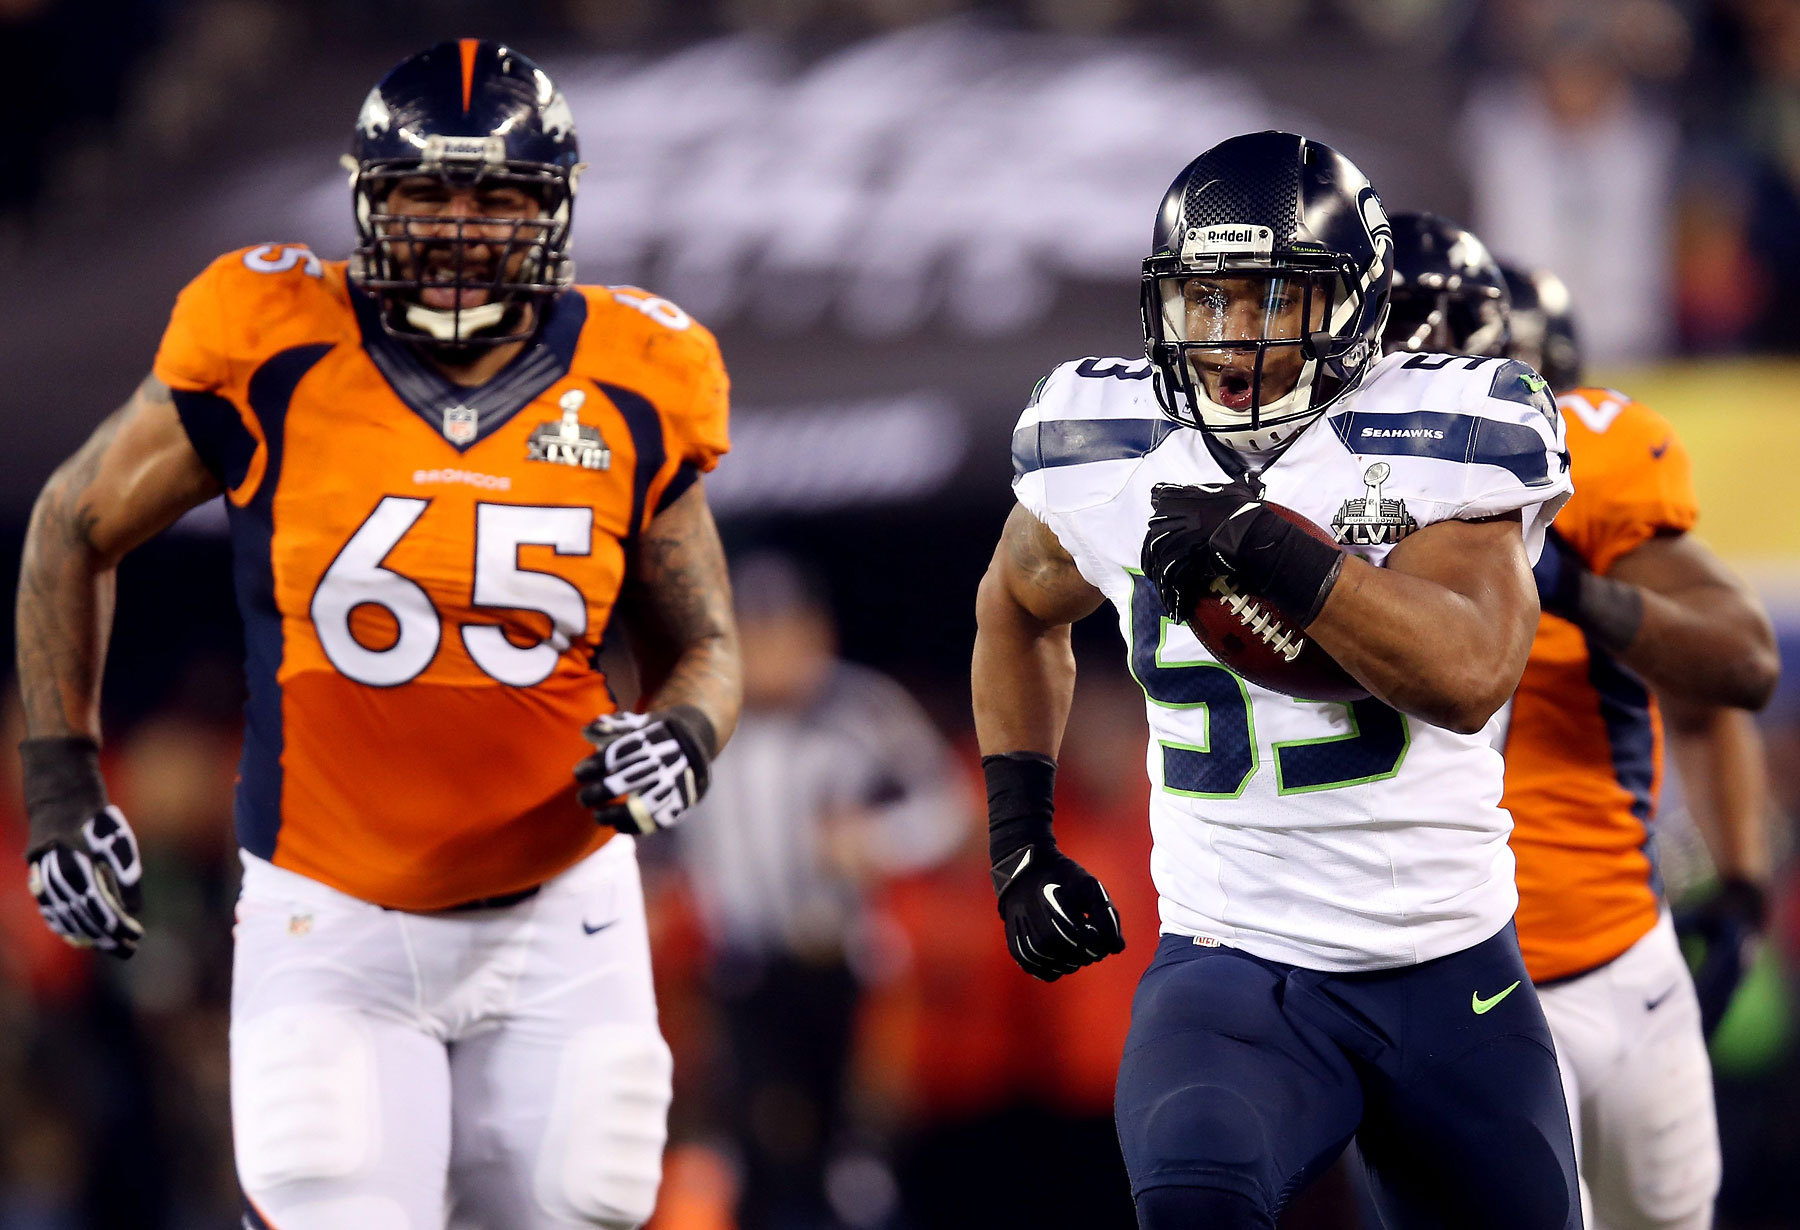 Outside linebacker Malcolm Smith of the Seattle Seahawks runs 69-yards for a touchdown against guard Louis Vasquez of the Denver Broncos after intercepting a pass intended for running back Knowshon Moreno of the Denver Broncos in the second quarter.